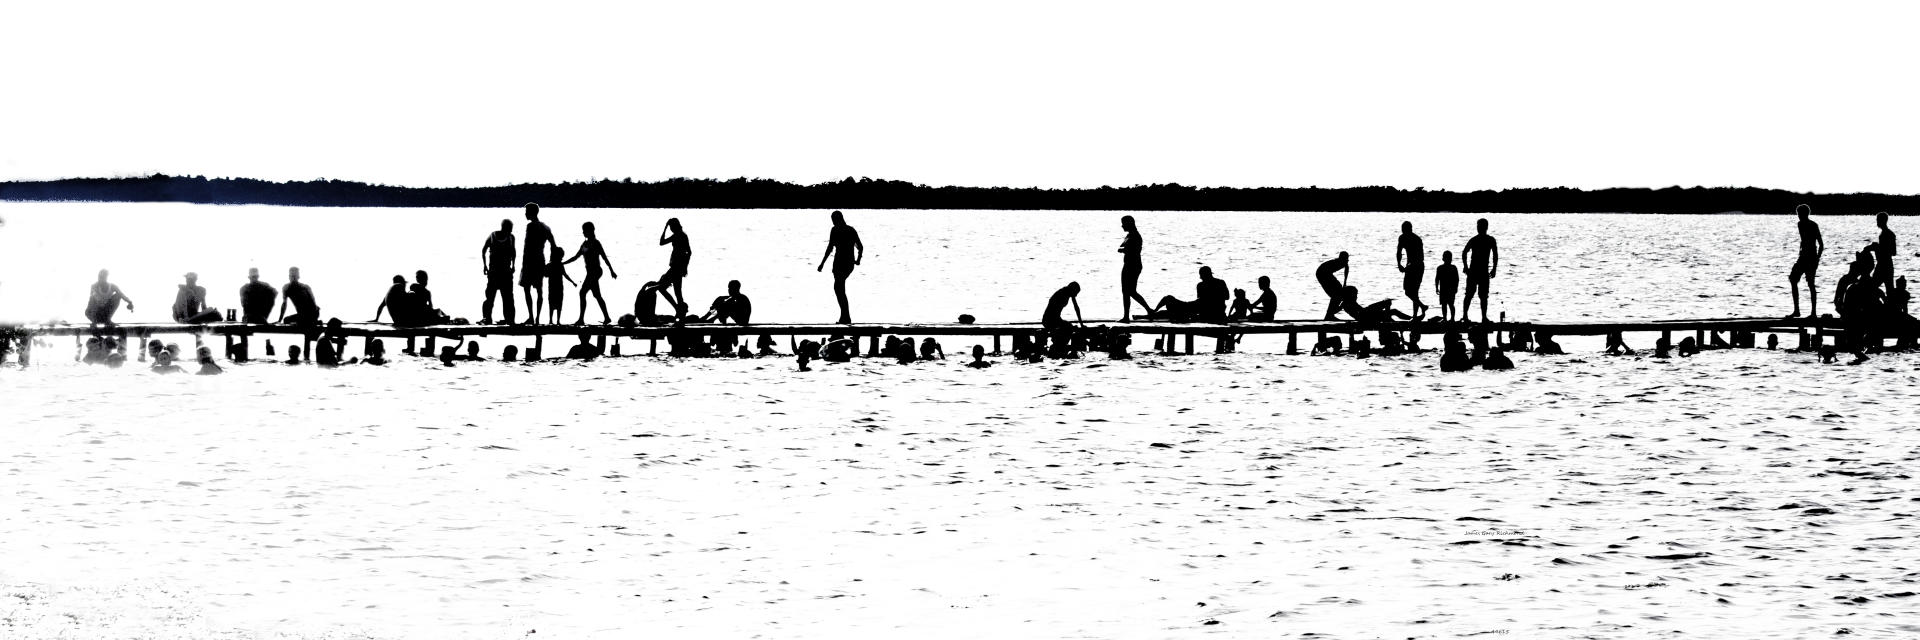 49615p  silhoutte, people on dock, swimming hole, lifestyles,, .jpg